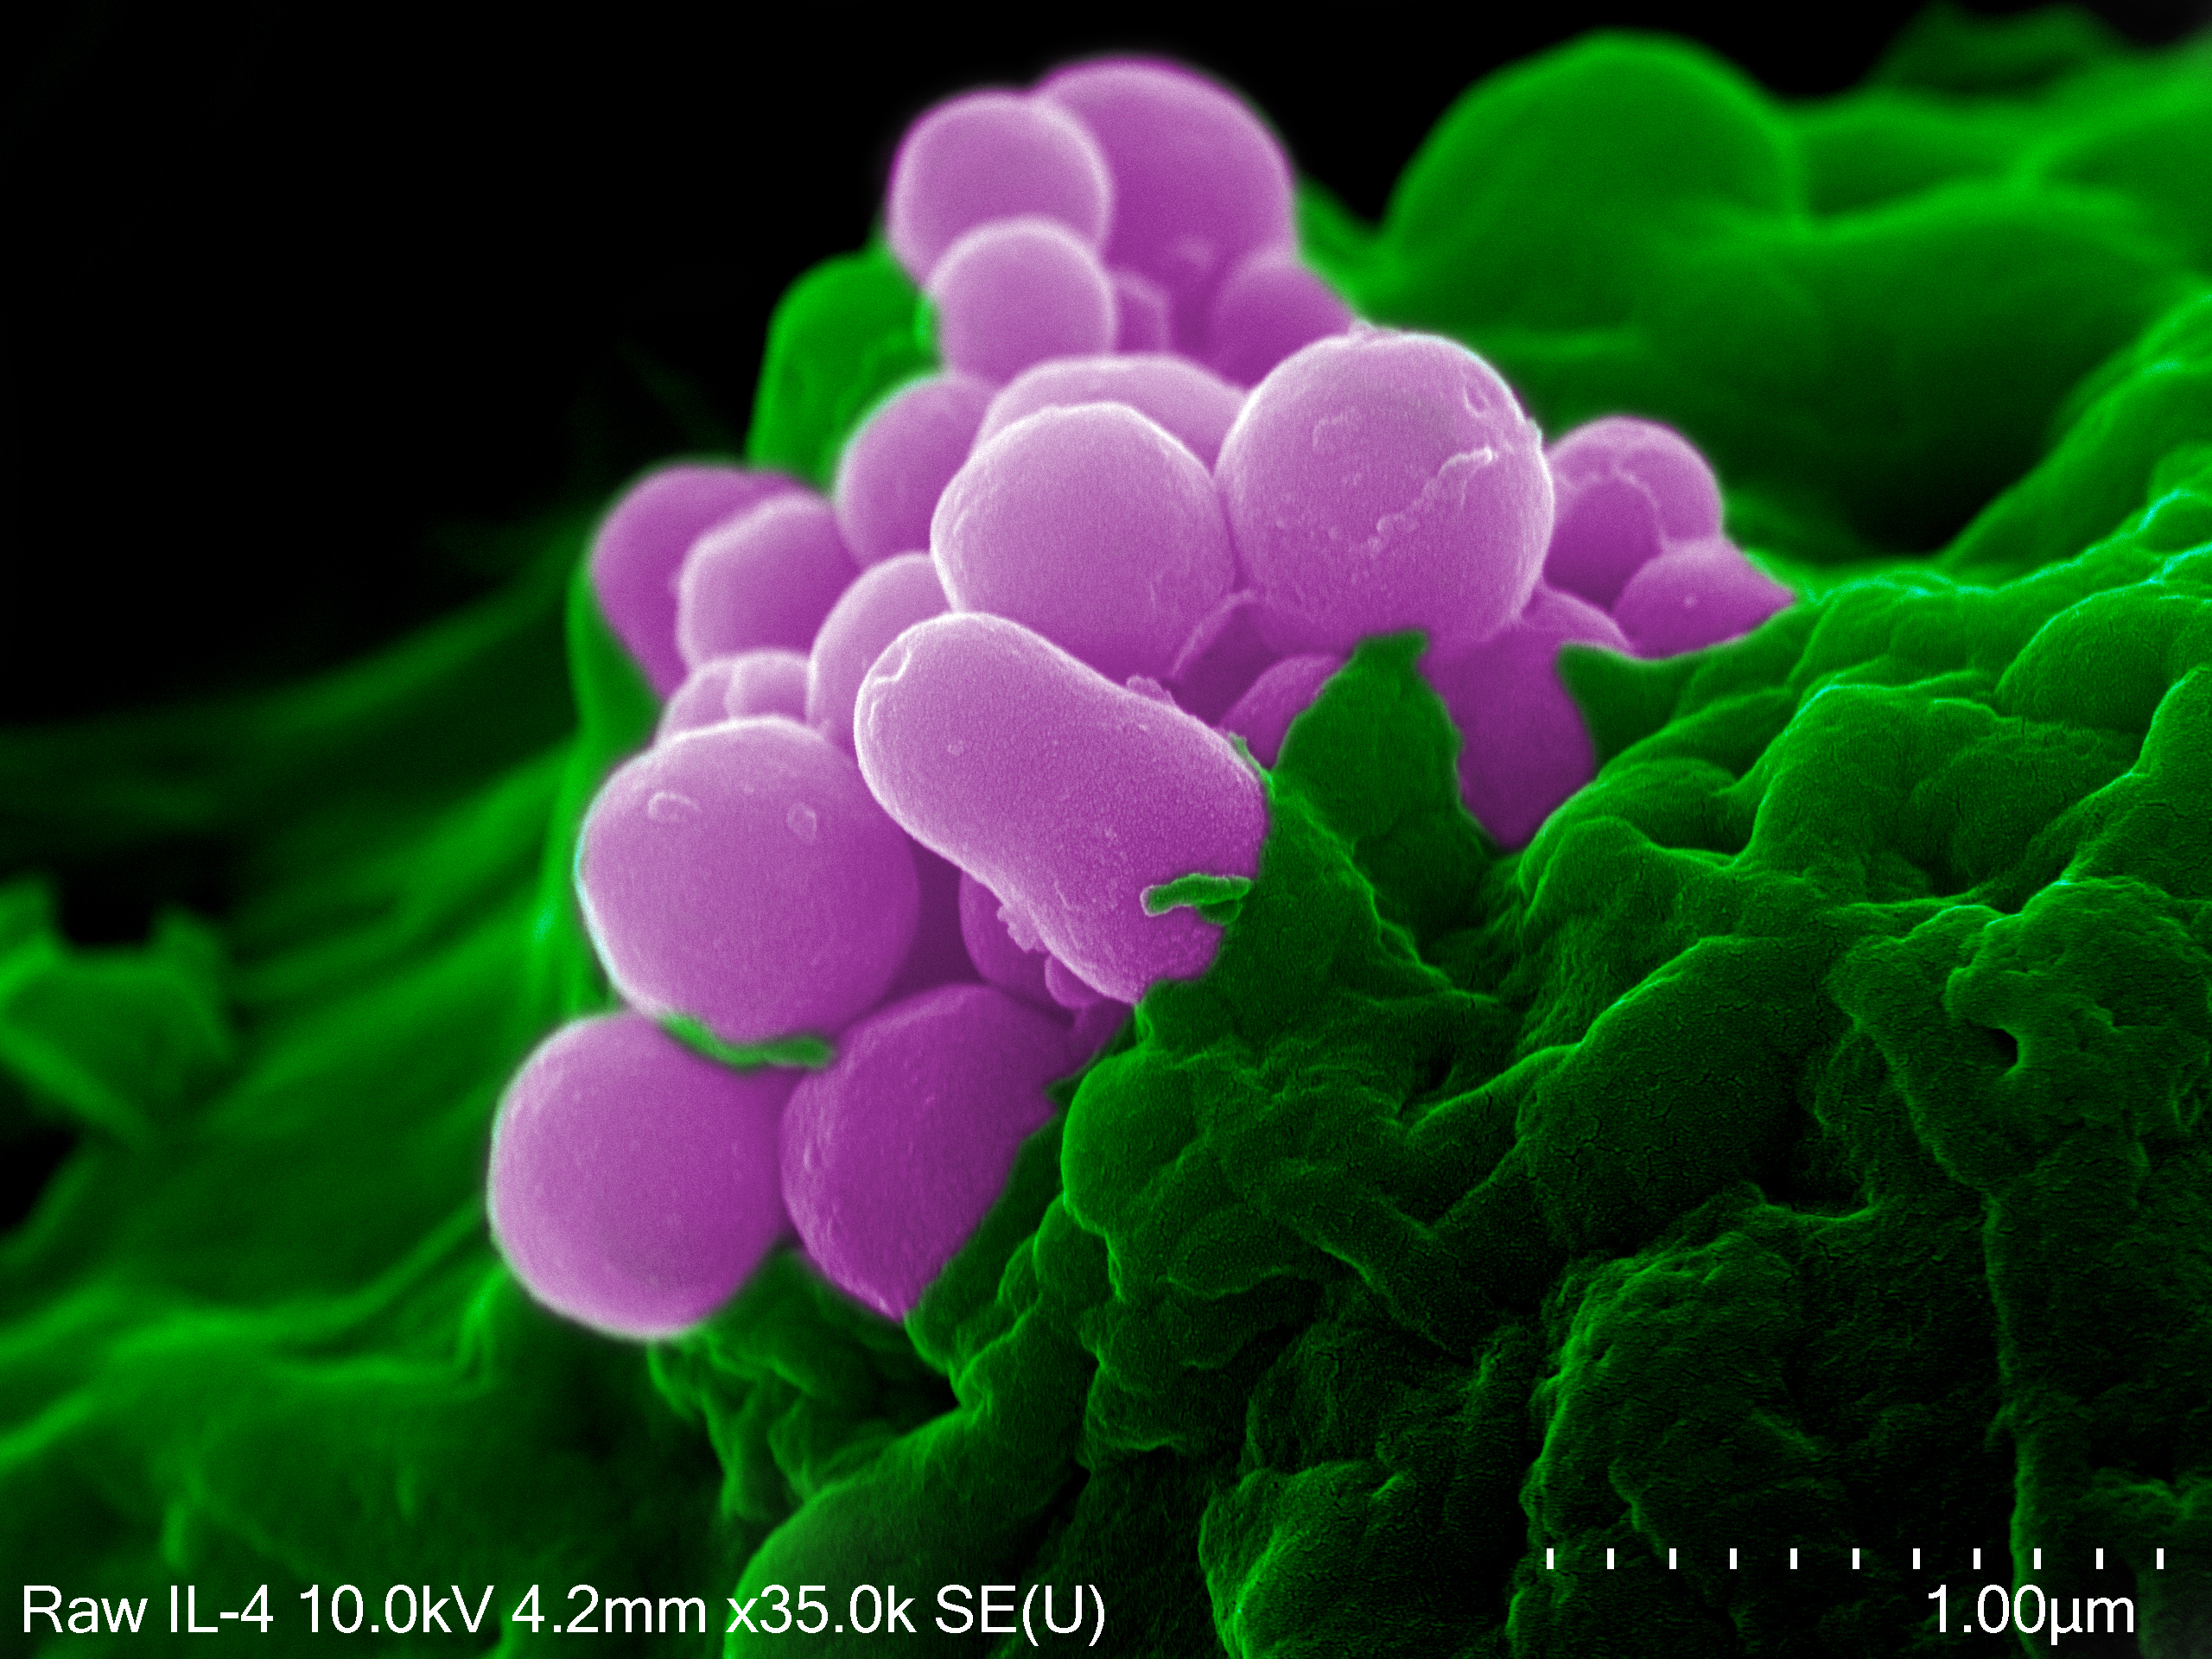 Cell-based trafficking of nanoparticles is achieved through in situ uptake and transport of nanoparticles by myeloid cells. Shown here is the cell membrane of a macrophage, pseudo-colored in green, in the process of internalizing silica nanoparticles, pseudo-colored in pink. Photo by Rita Serda, Ph.D. and courtesy of Scott C. Holmes 